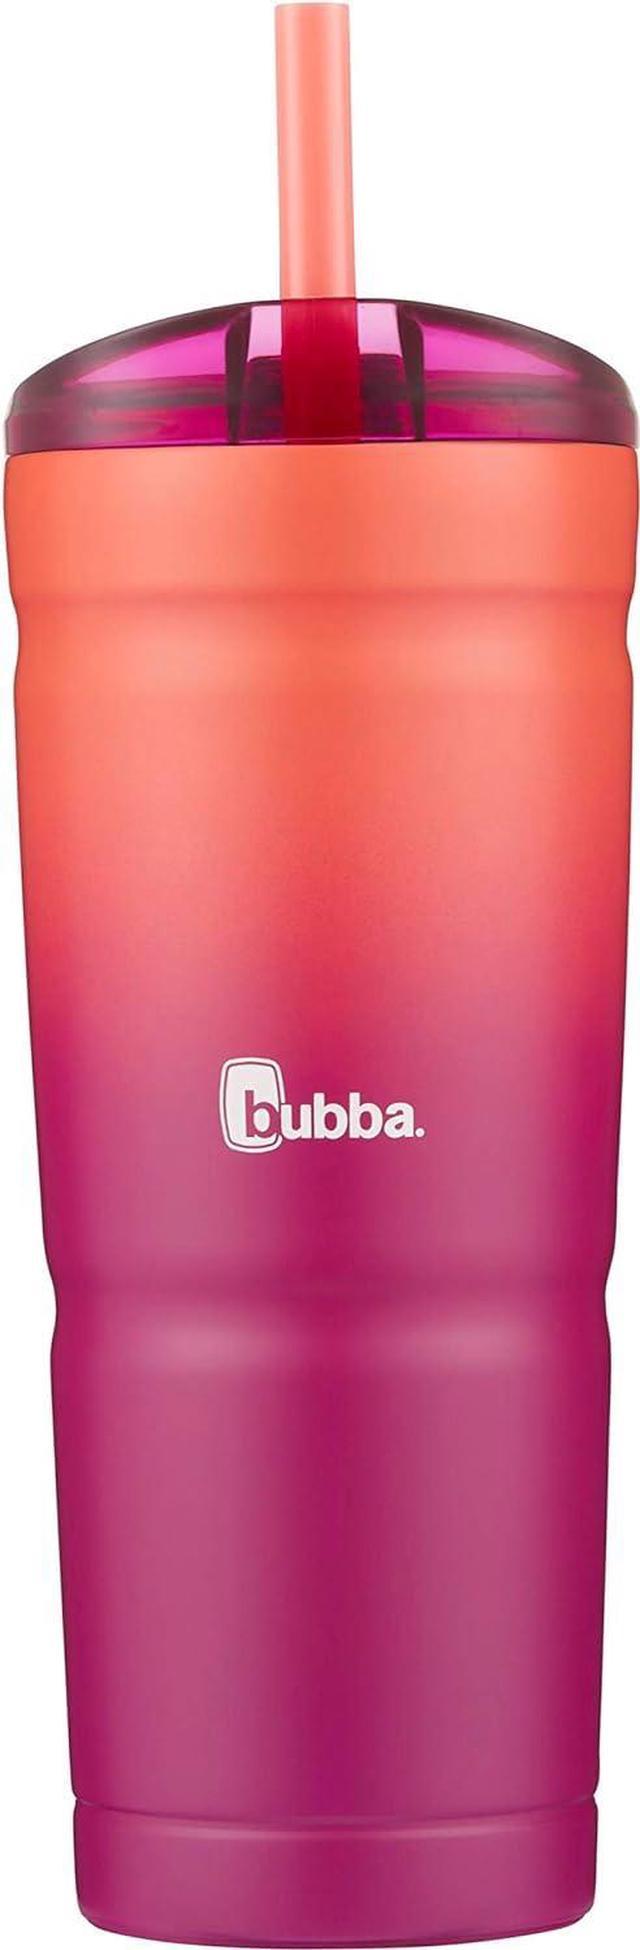 Bubba 24oz. Insulated Stainless Steel Travel Tumbler Straw